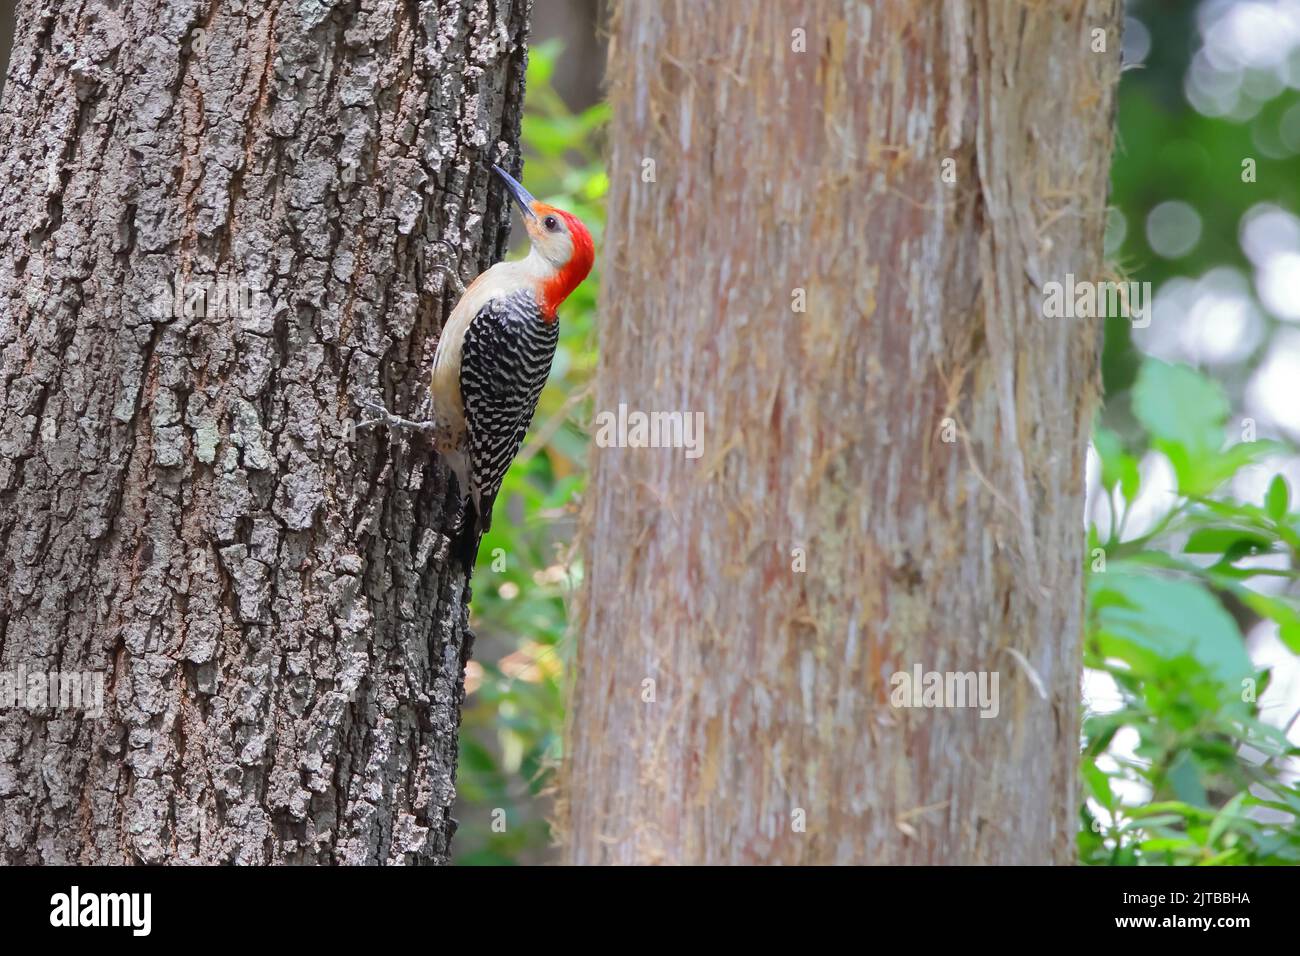 A male red-bellied woodpecker clinging to a large tree trunk Stock Photo